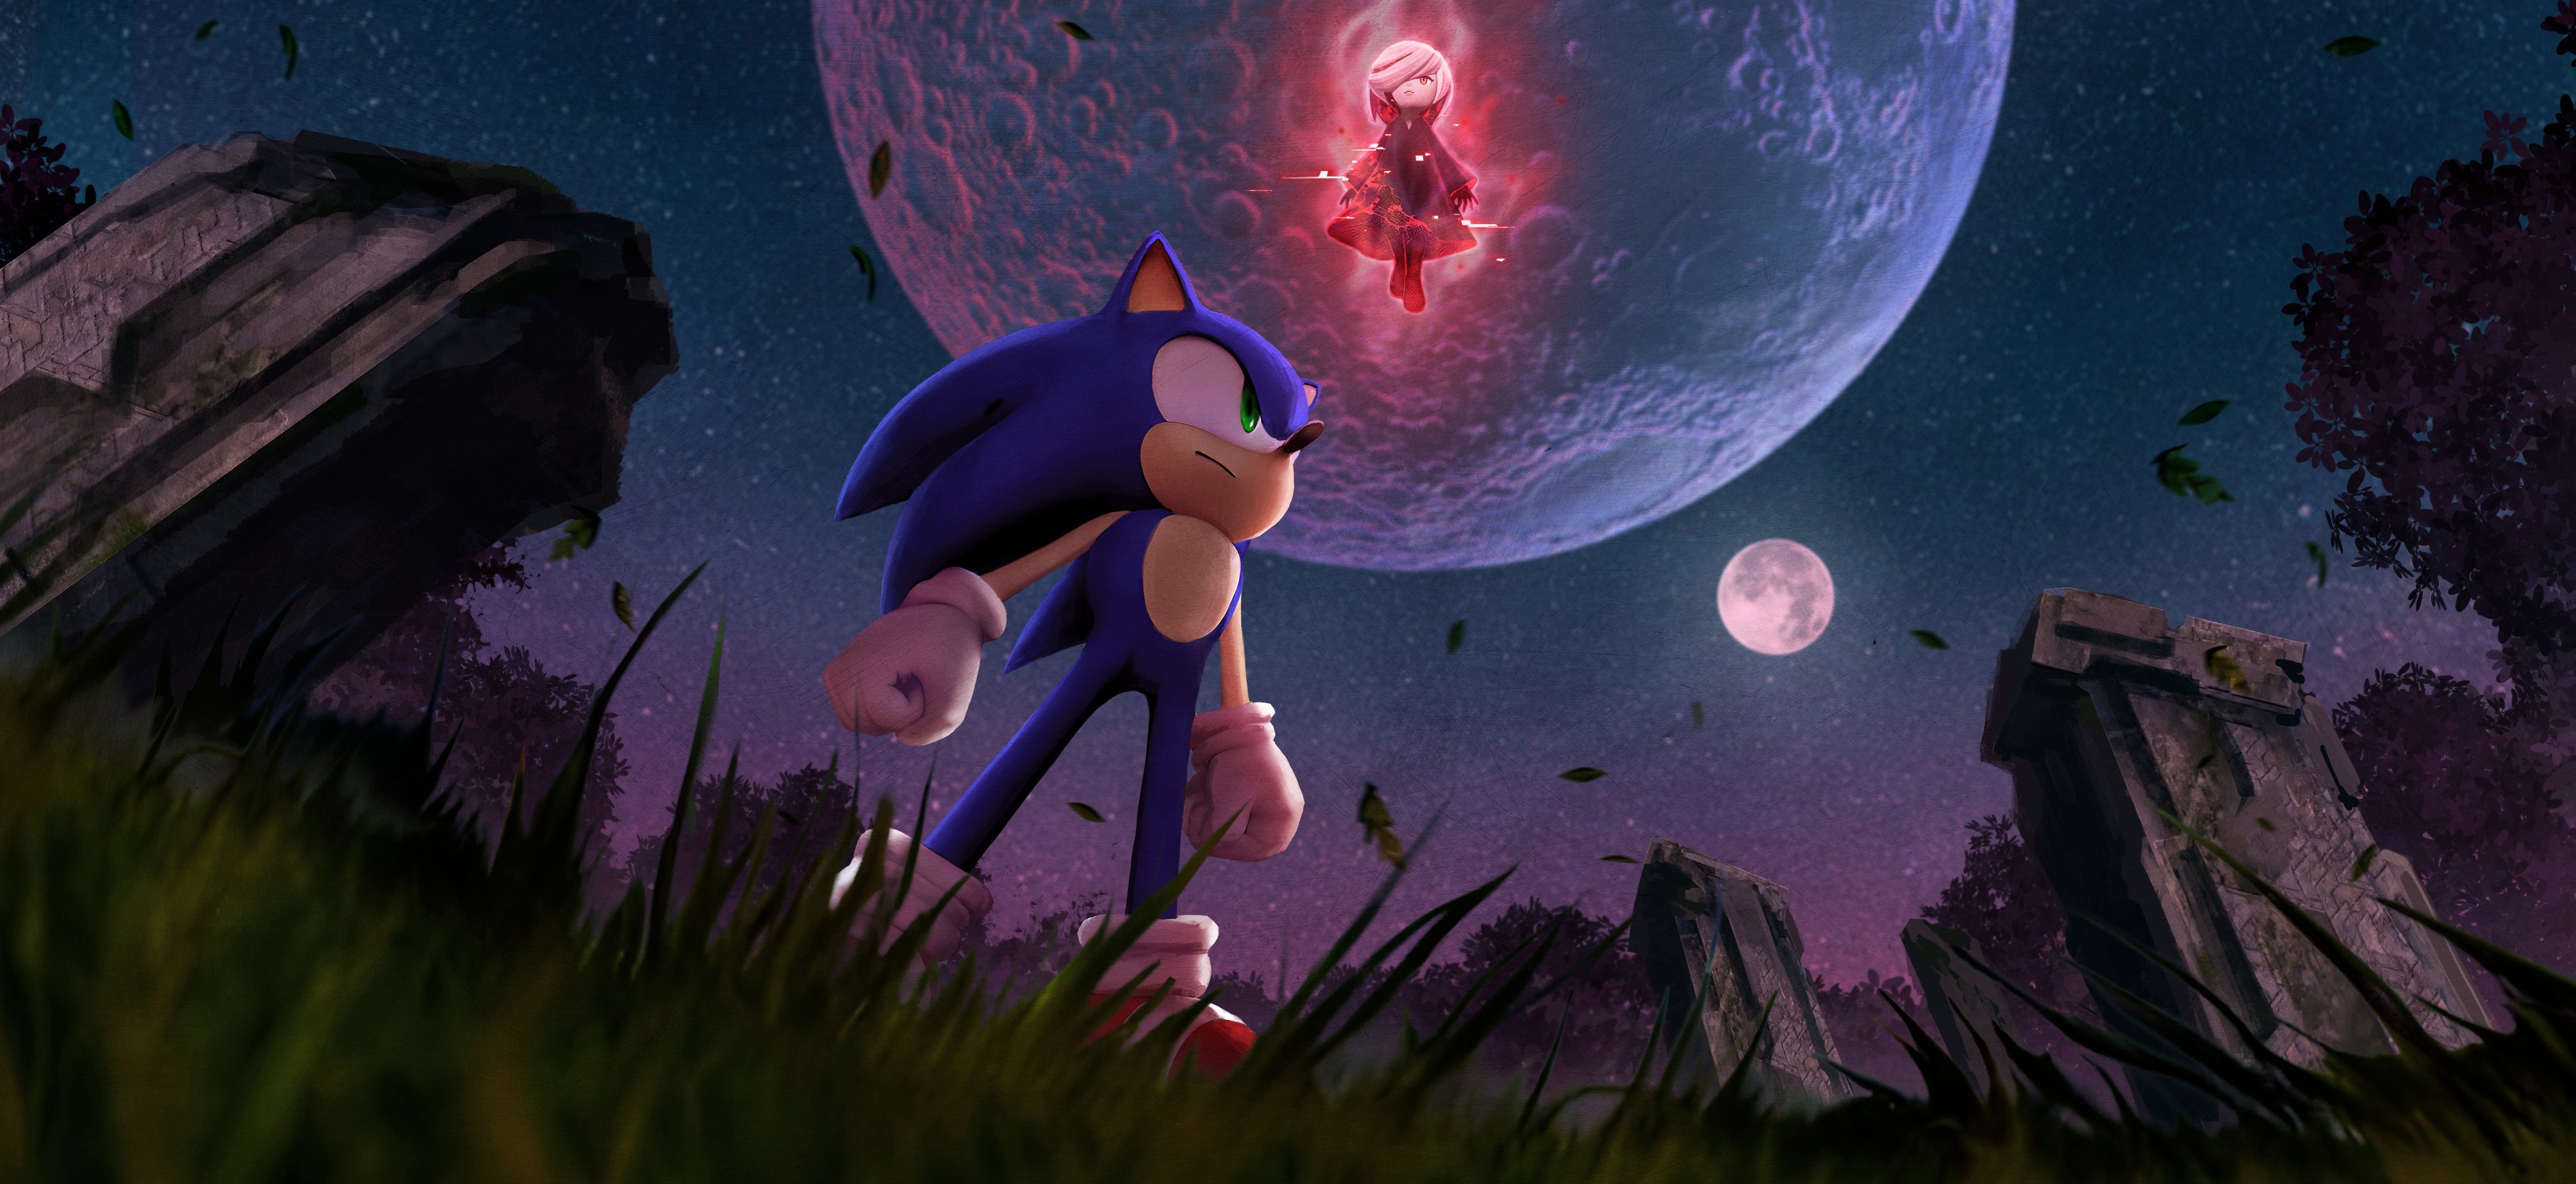 The End (Sonic Frontiers)